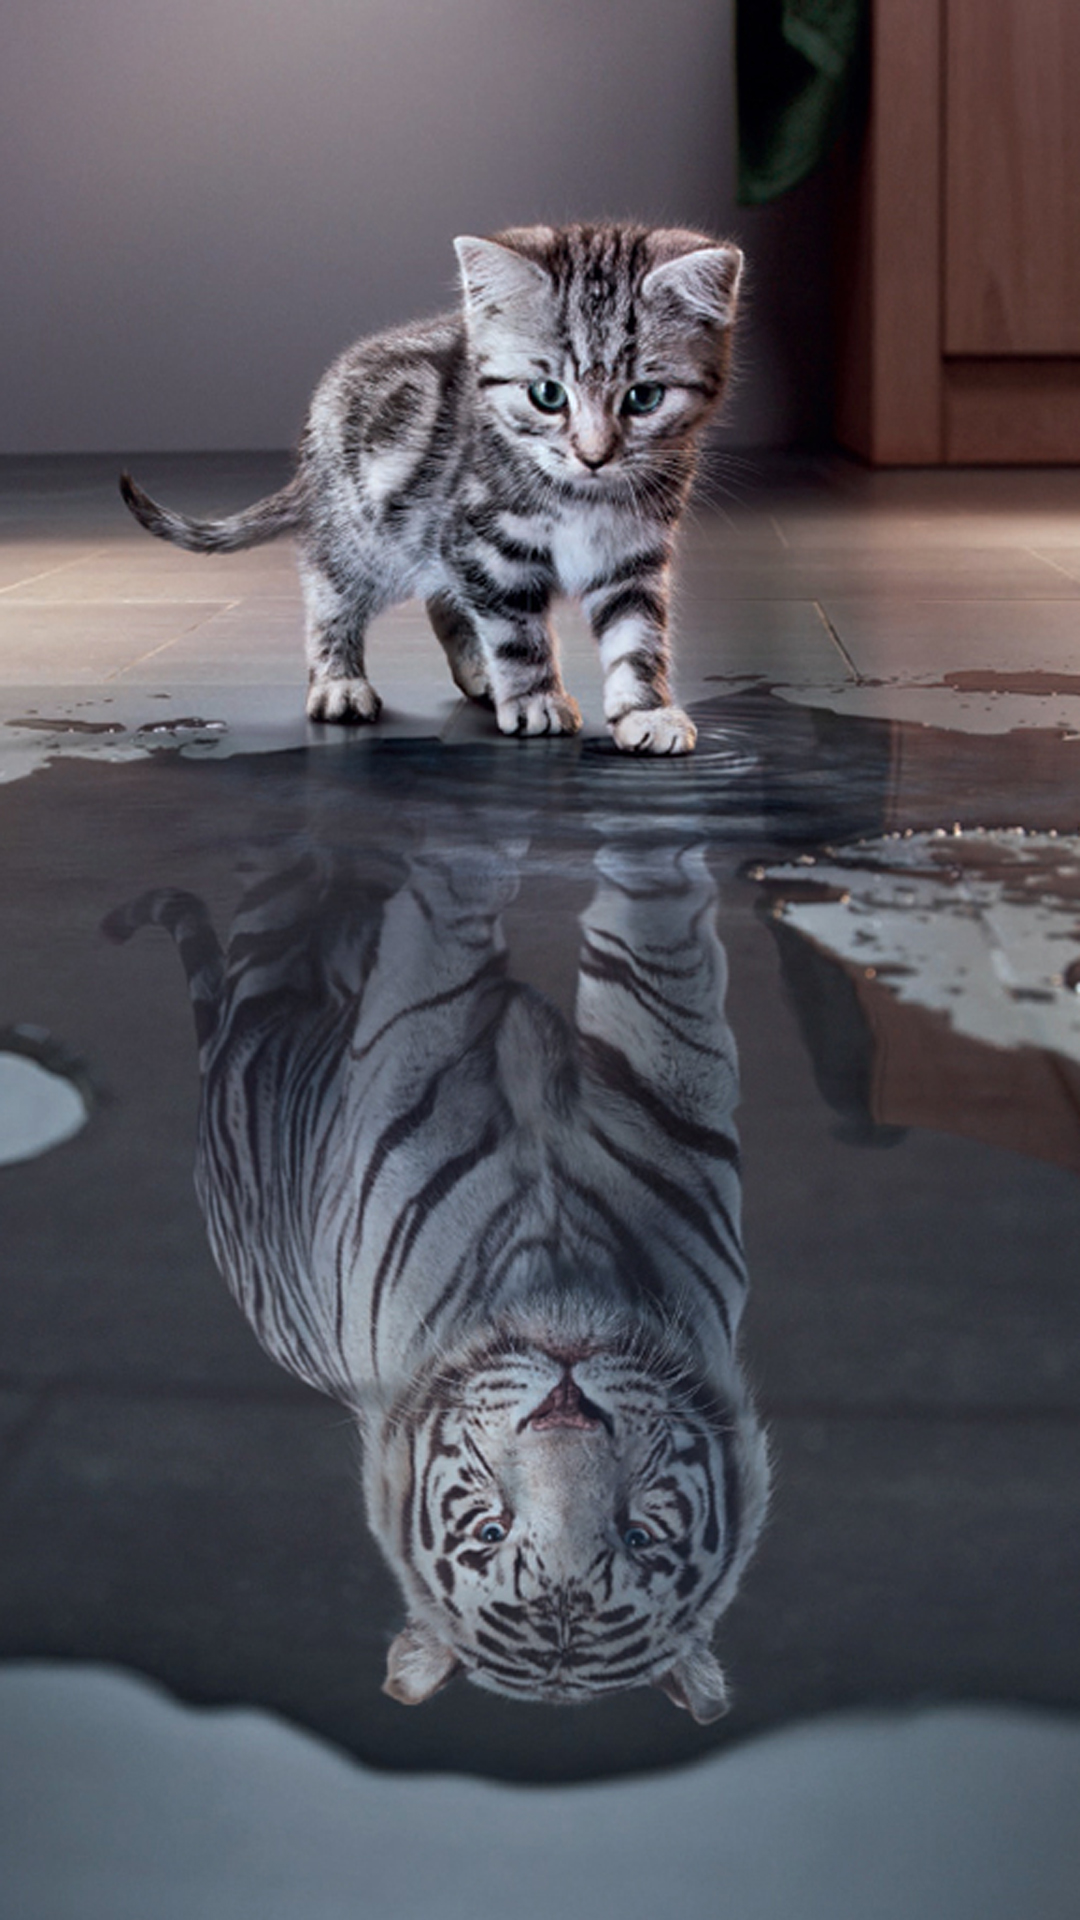 white tiger, kitten, animal, cat, reflection, puddle, cats HD wallpaper